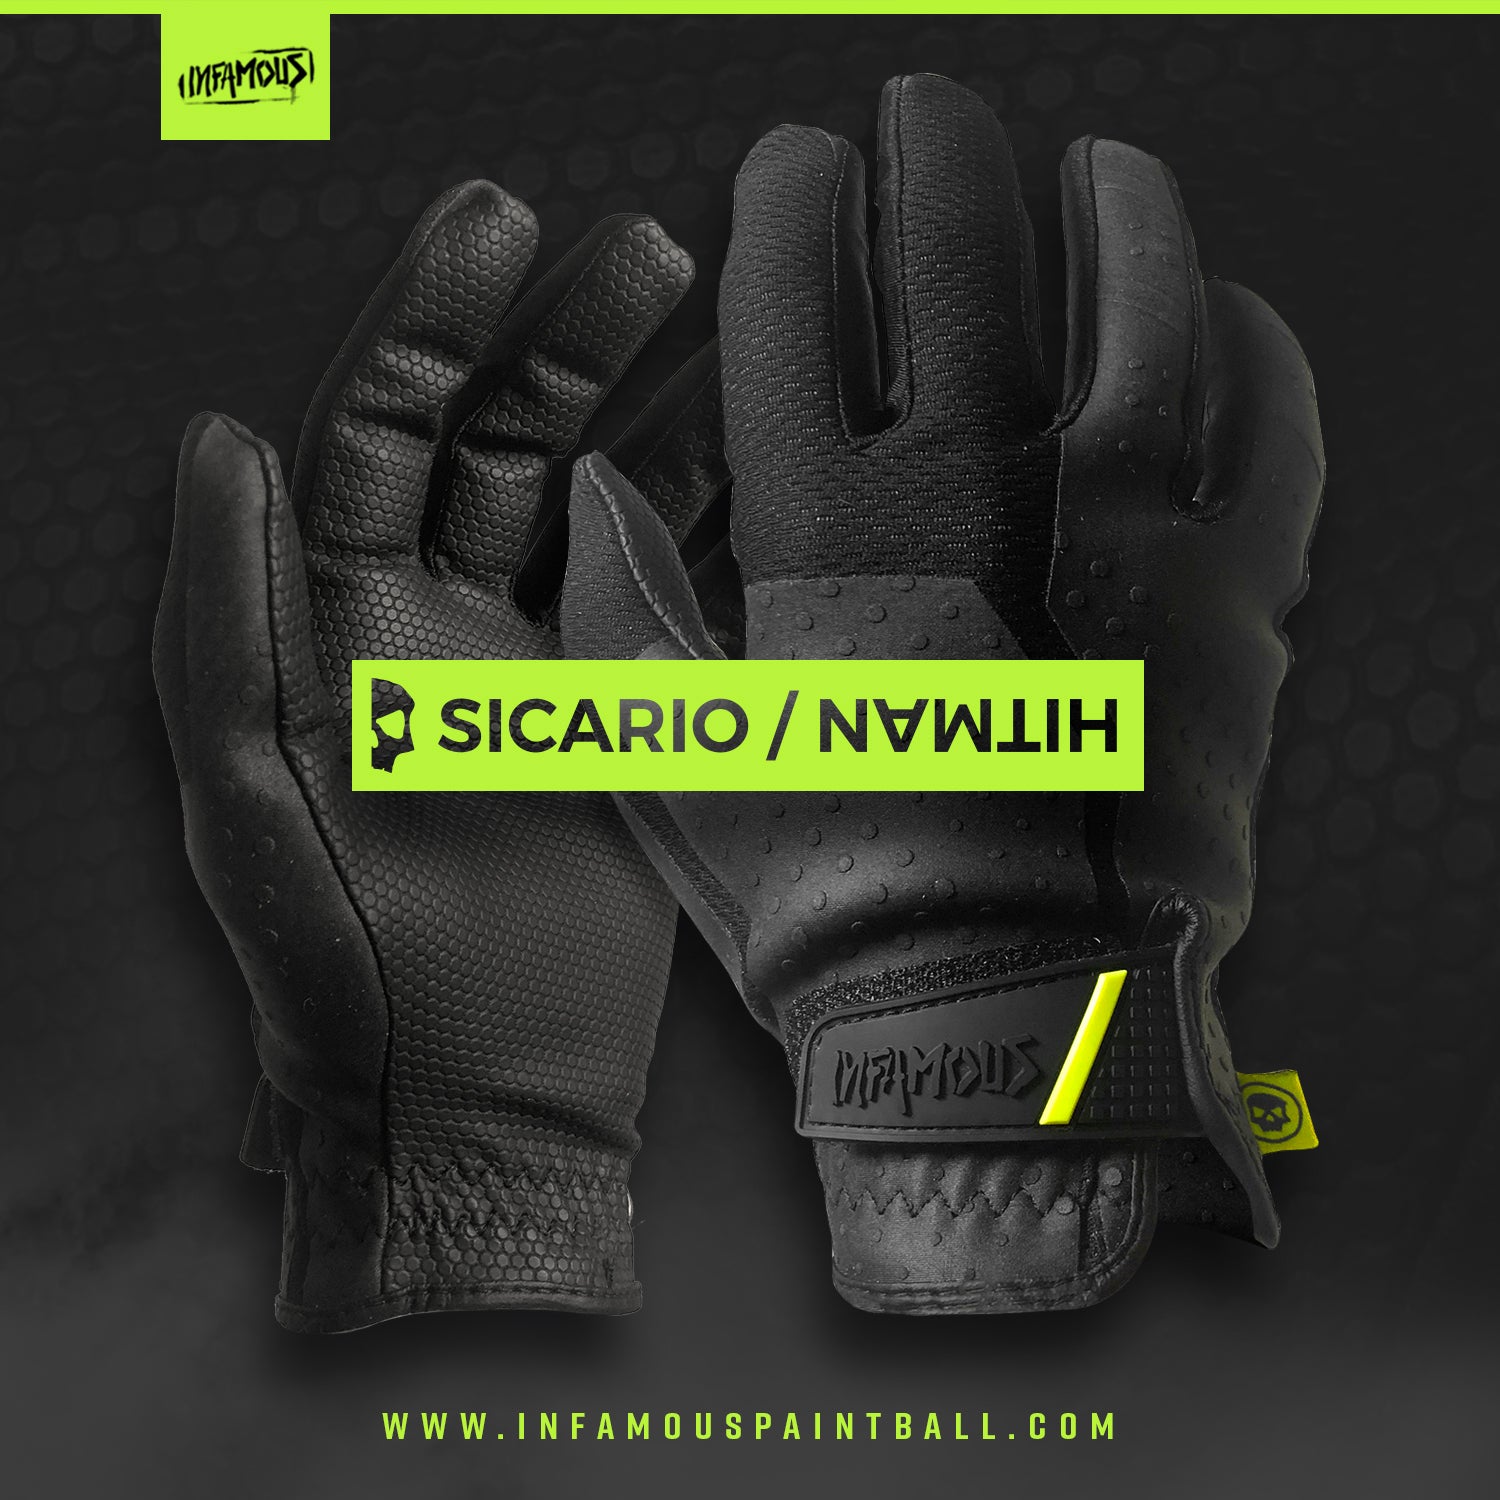 New Infamous Pro DNA Sicario Gloves